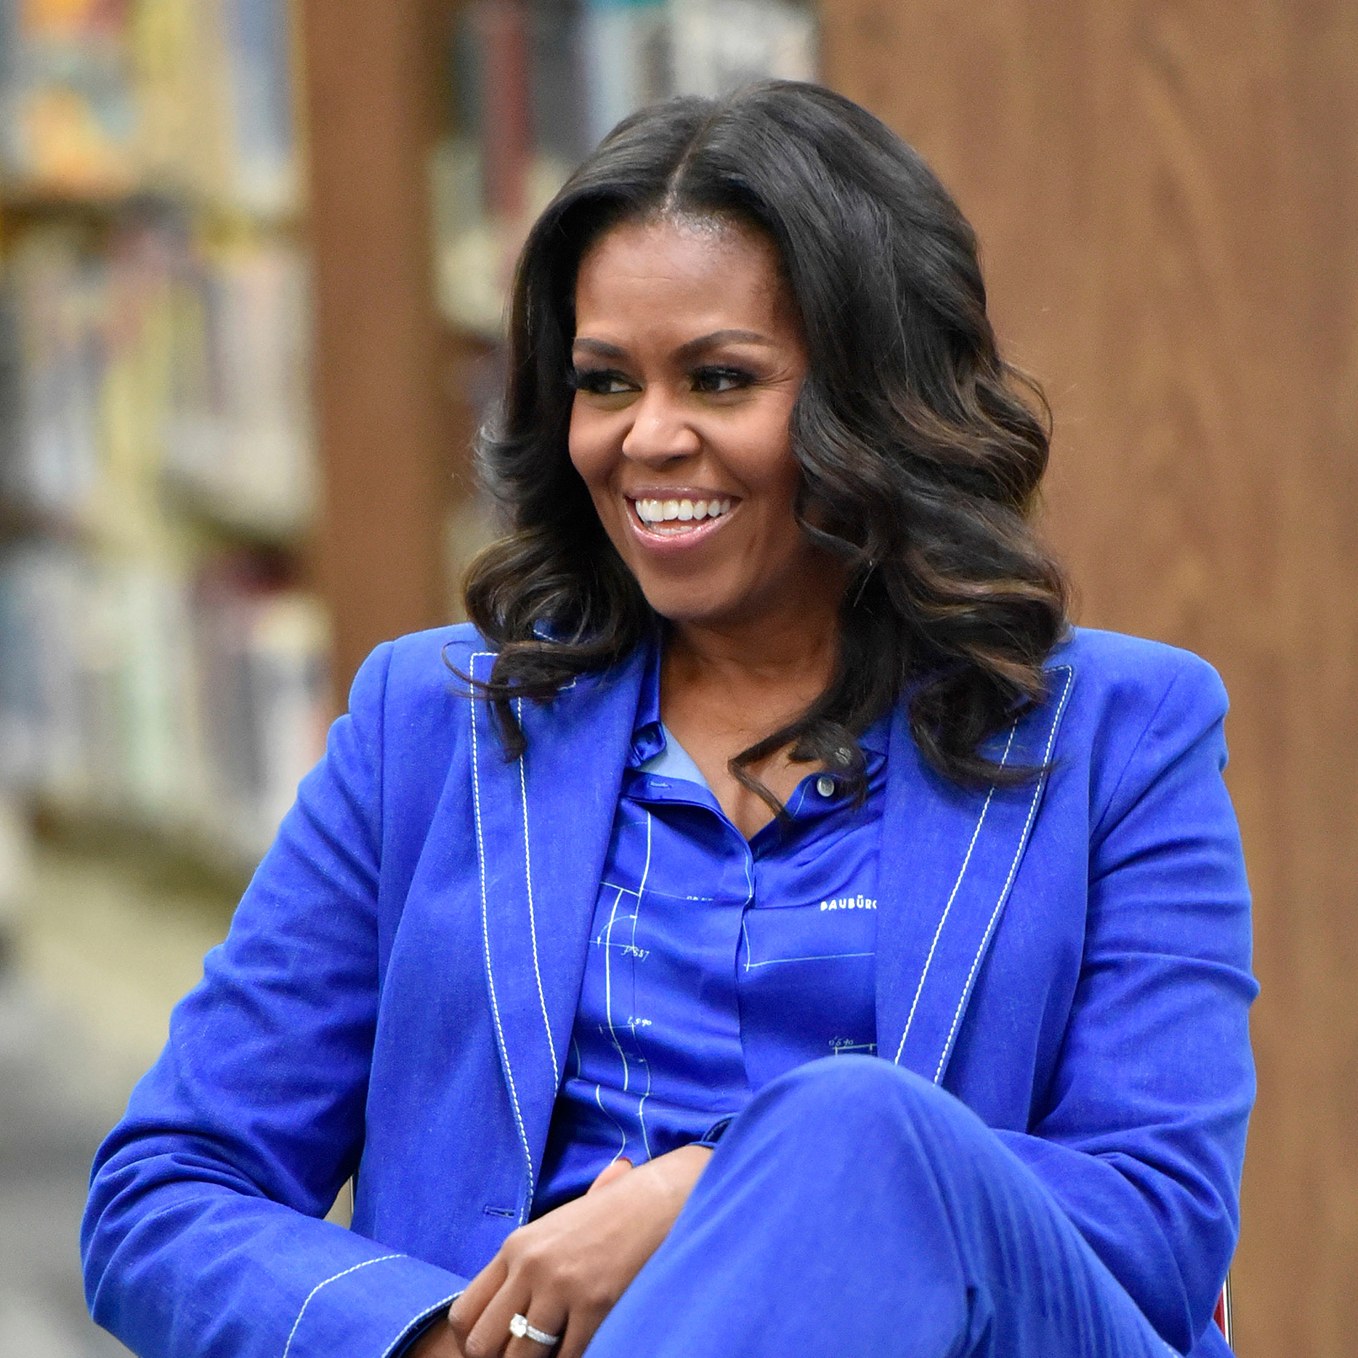 Michelle Obama Travels To Southeast Asia For Obama Foundation Leadership Programs